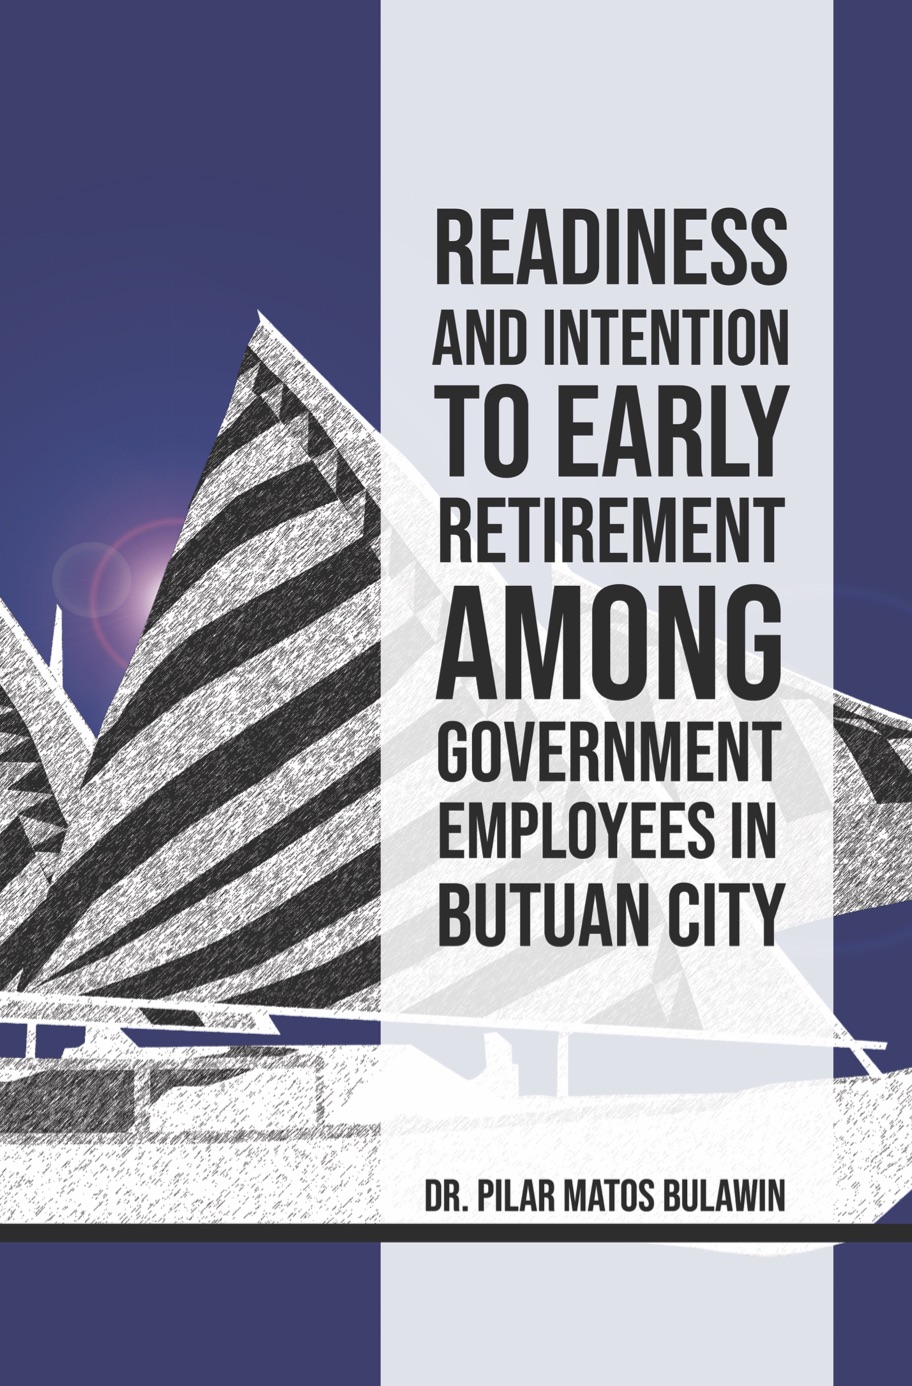 Readiness and Intention to Early Retirement Among Government Employees in Butuan City